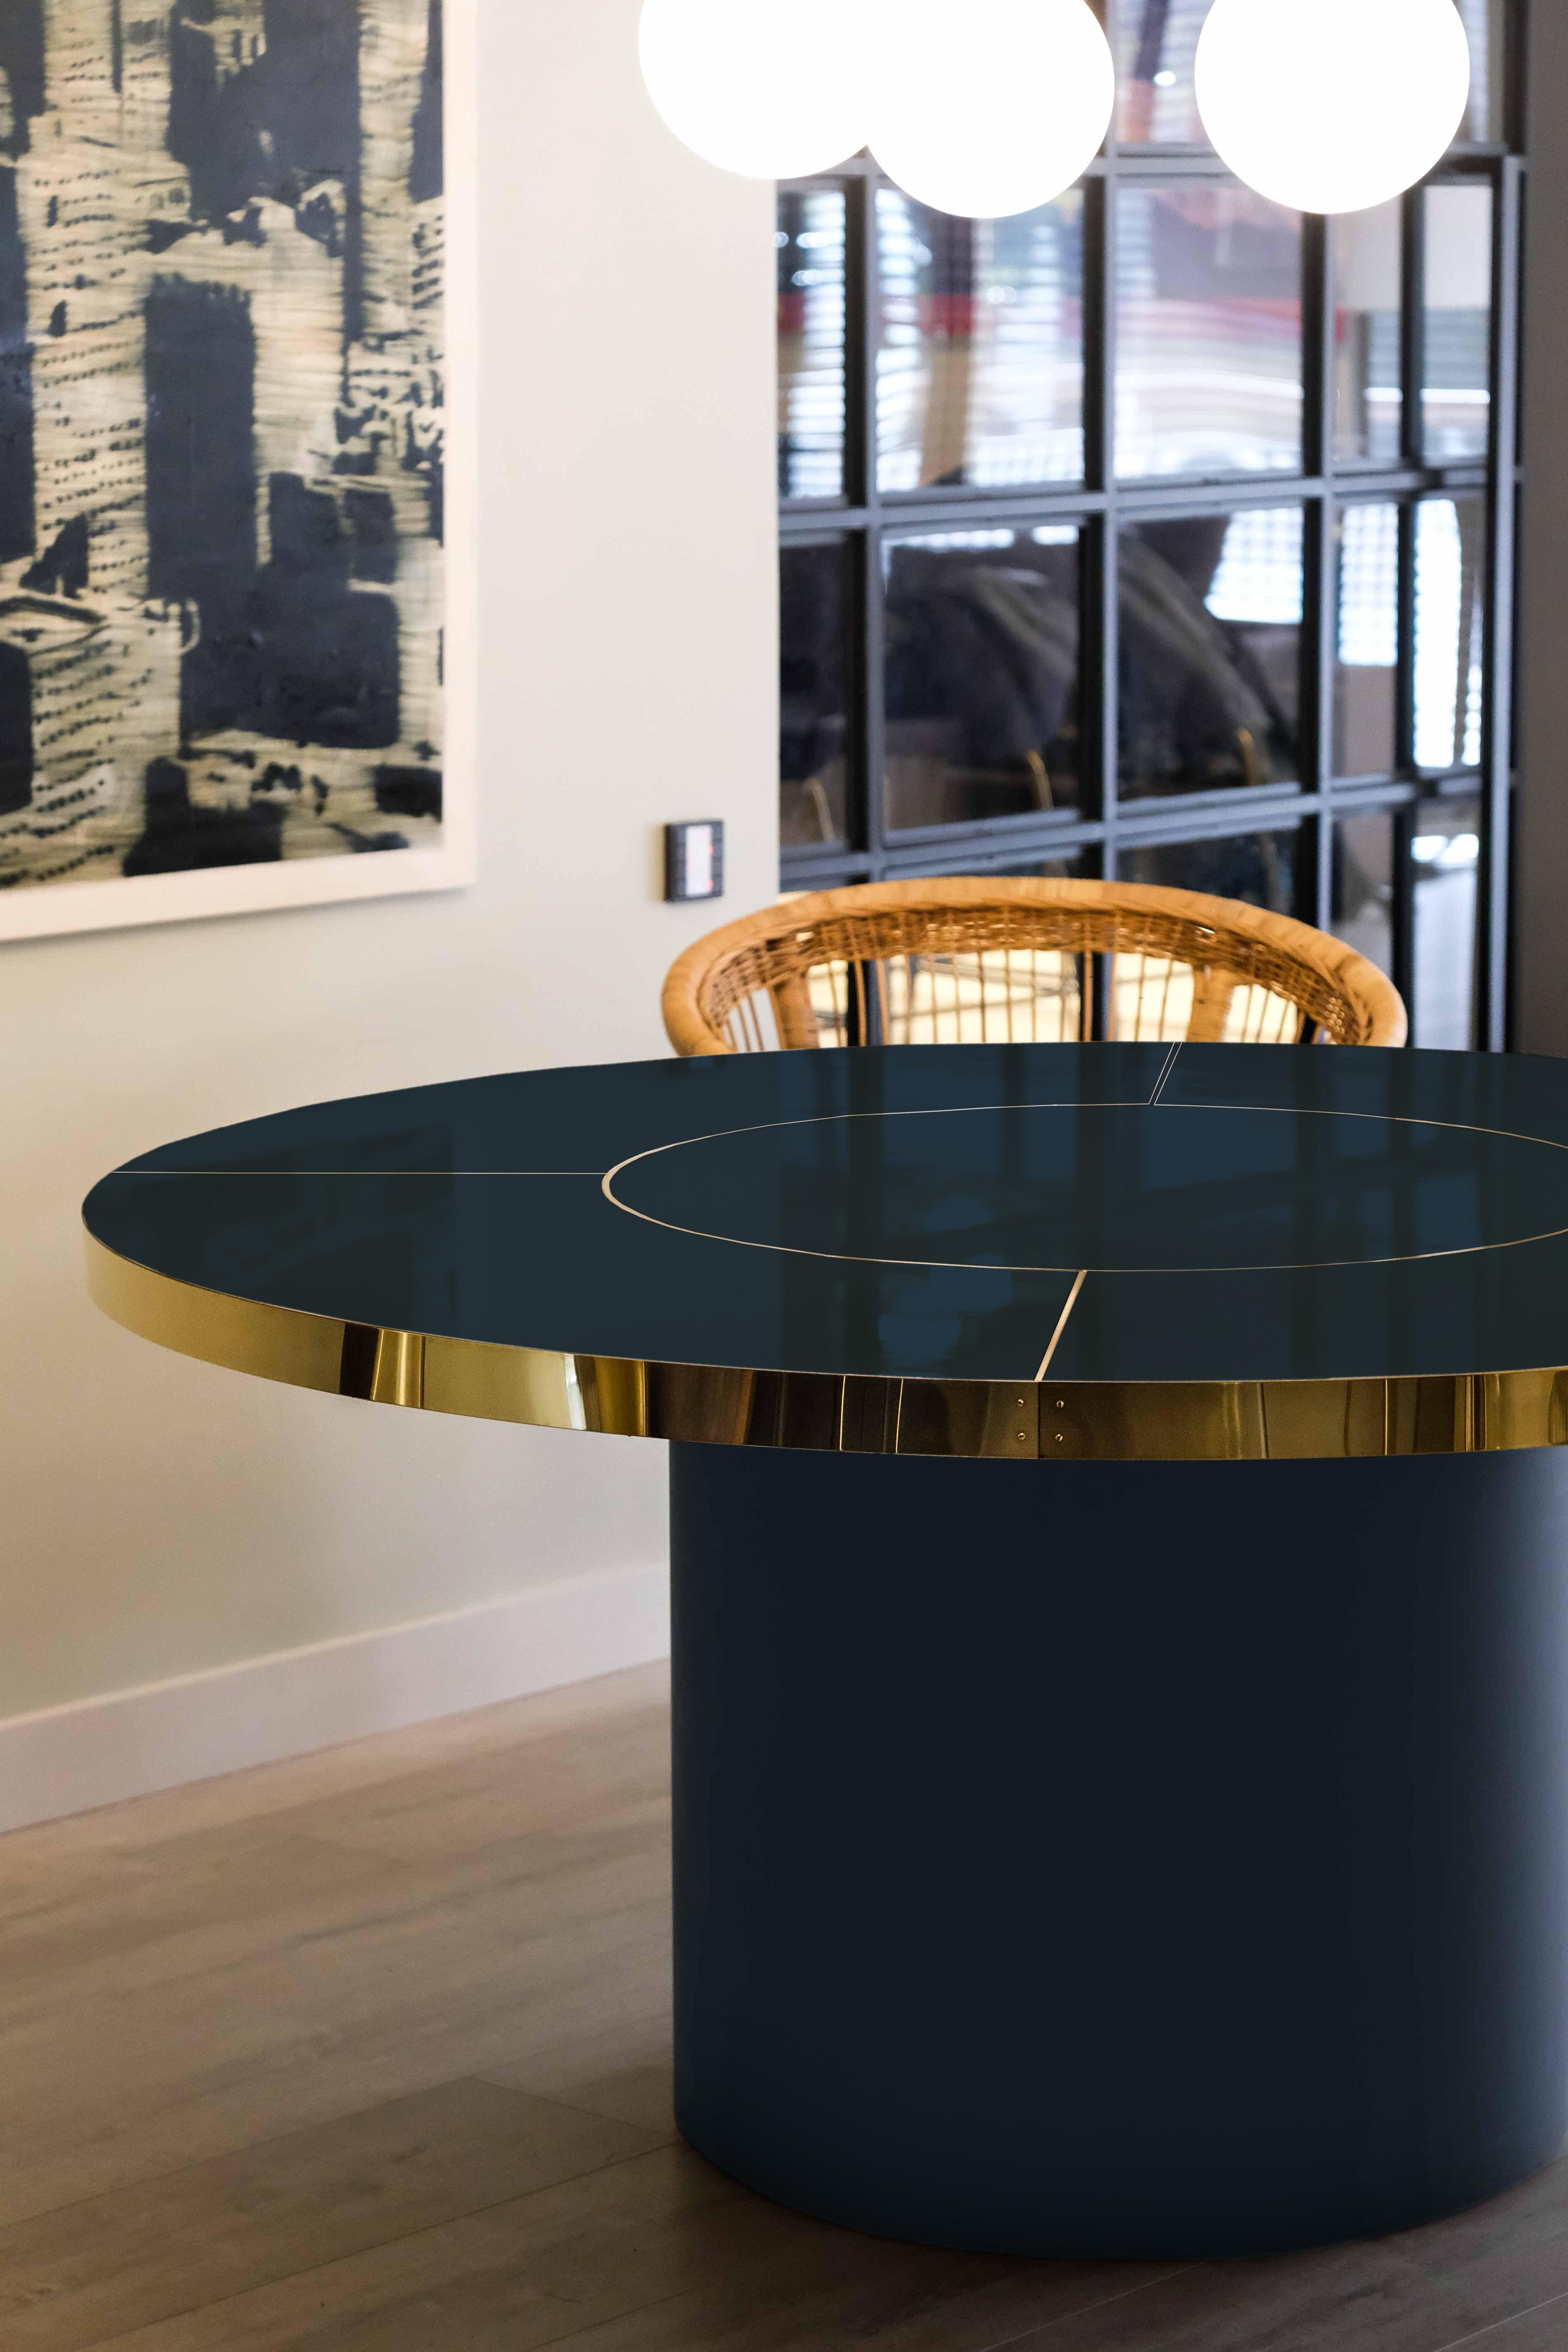 Retro Design Round Dining Table Palm Springs Style High Gloss Laminated&Brass L en vente 2